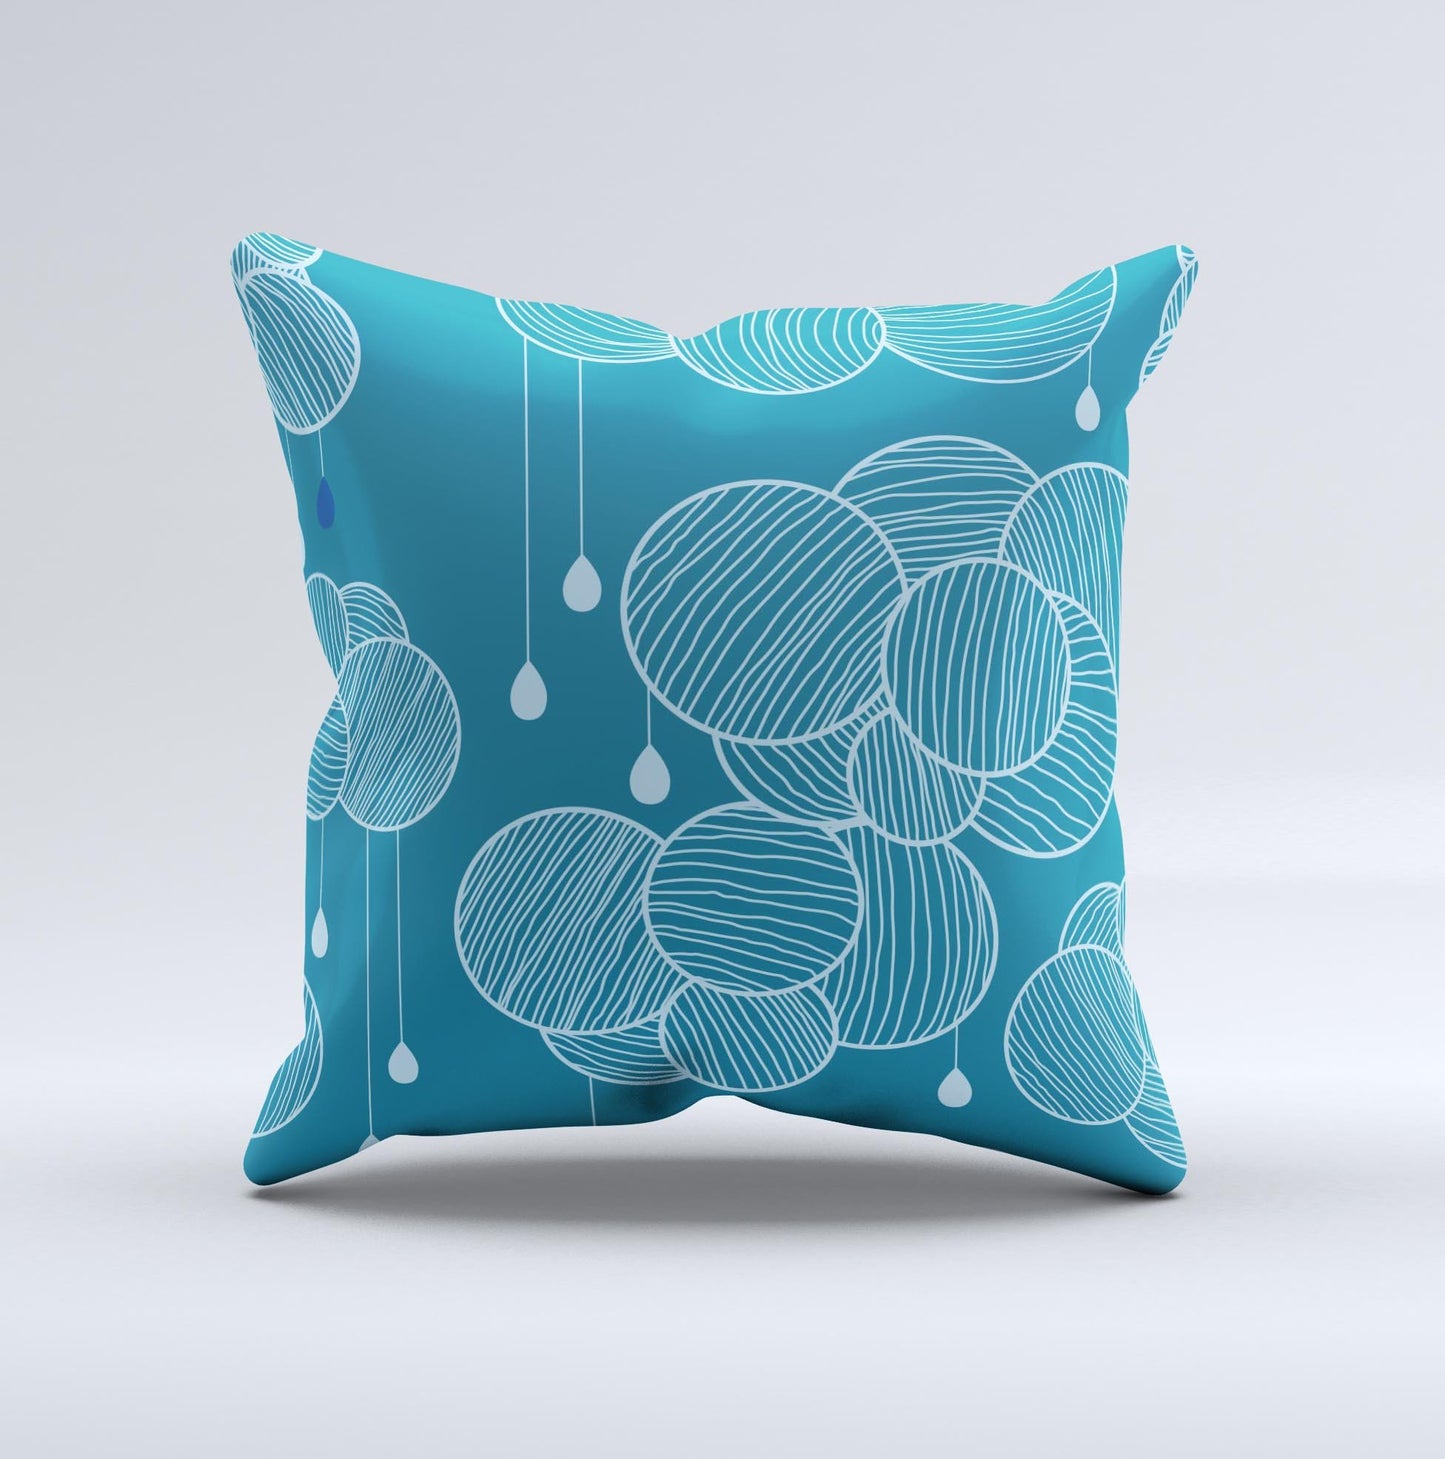 Teal Abstract Raining Yarn Clouds ink-Fuzed Decorative Throw Pillow